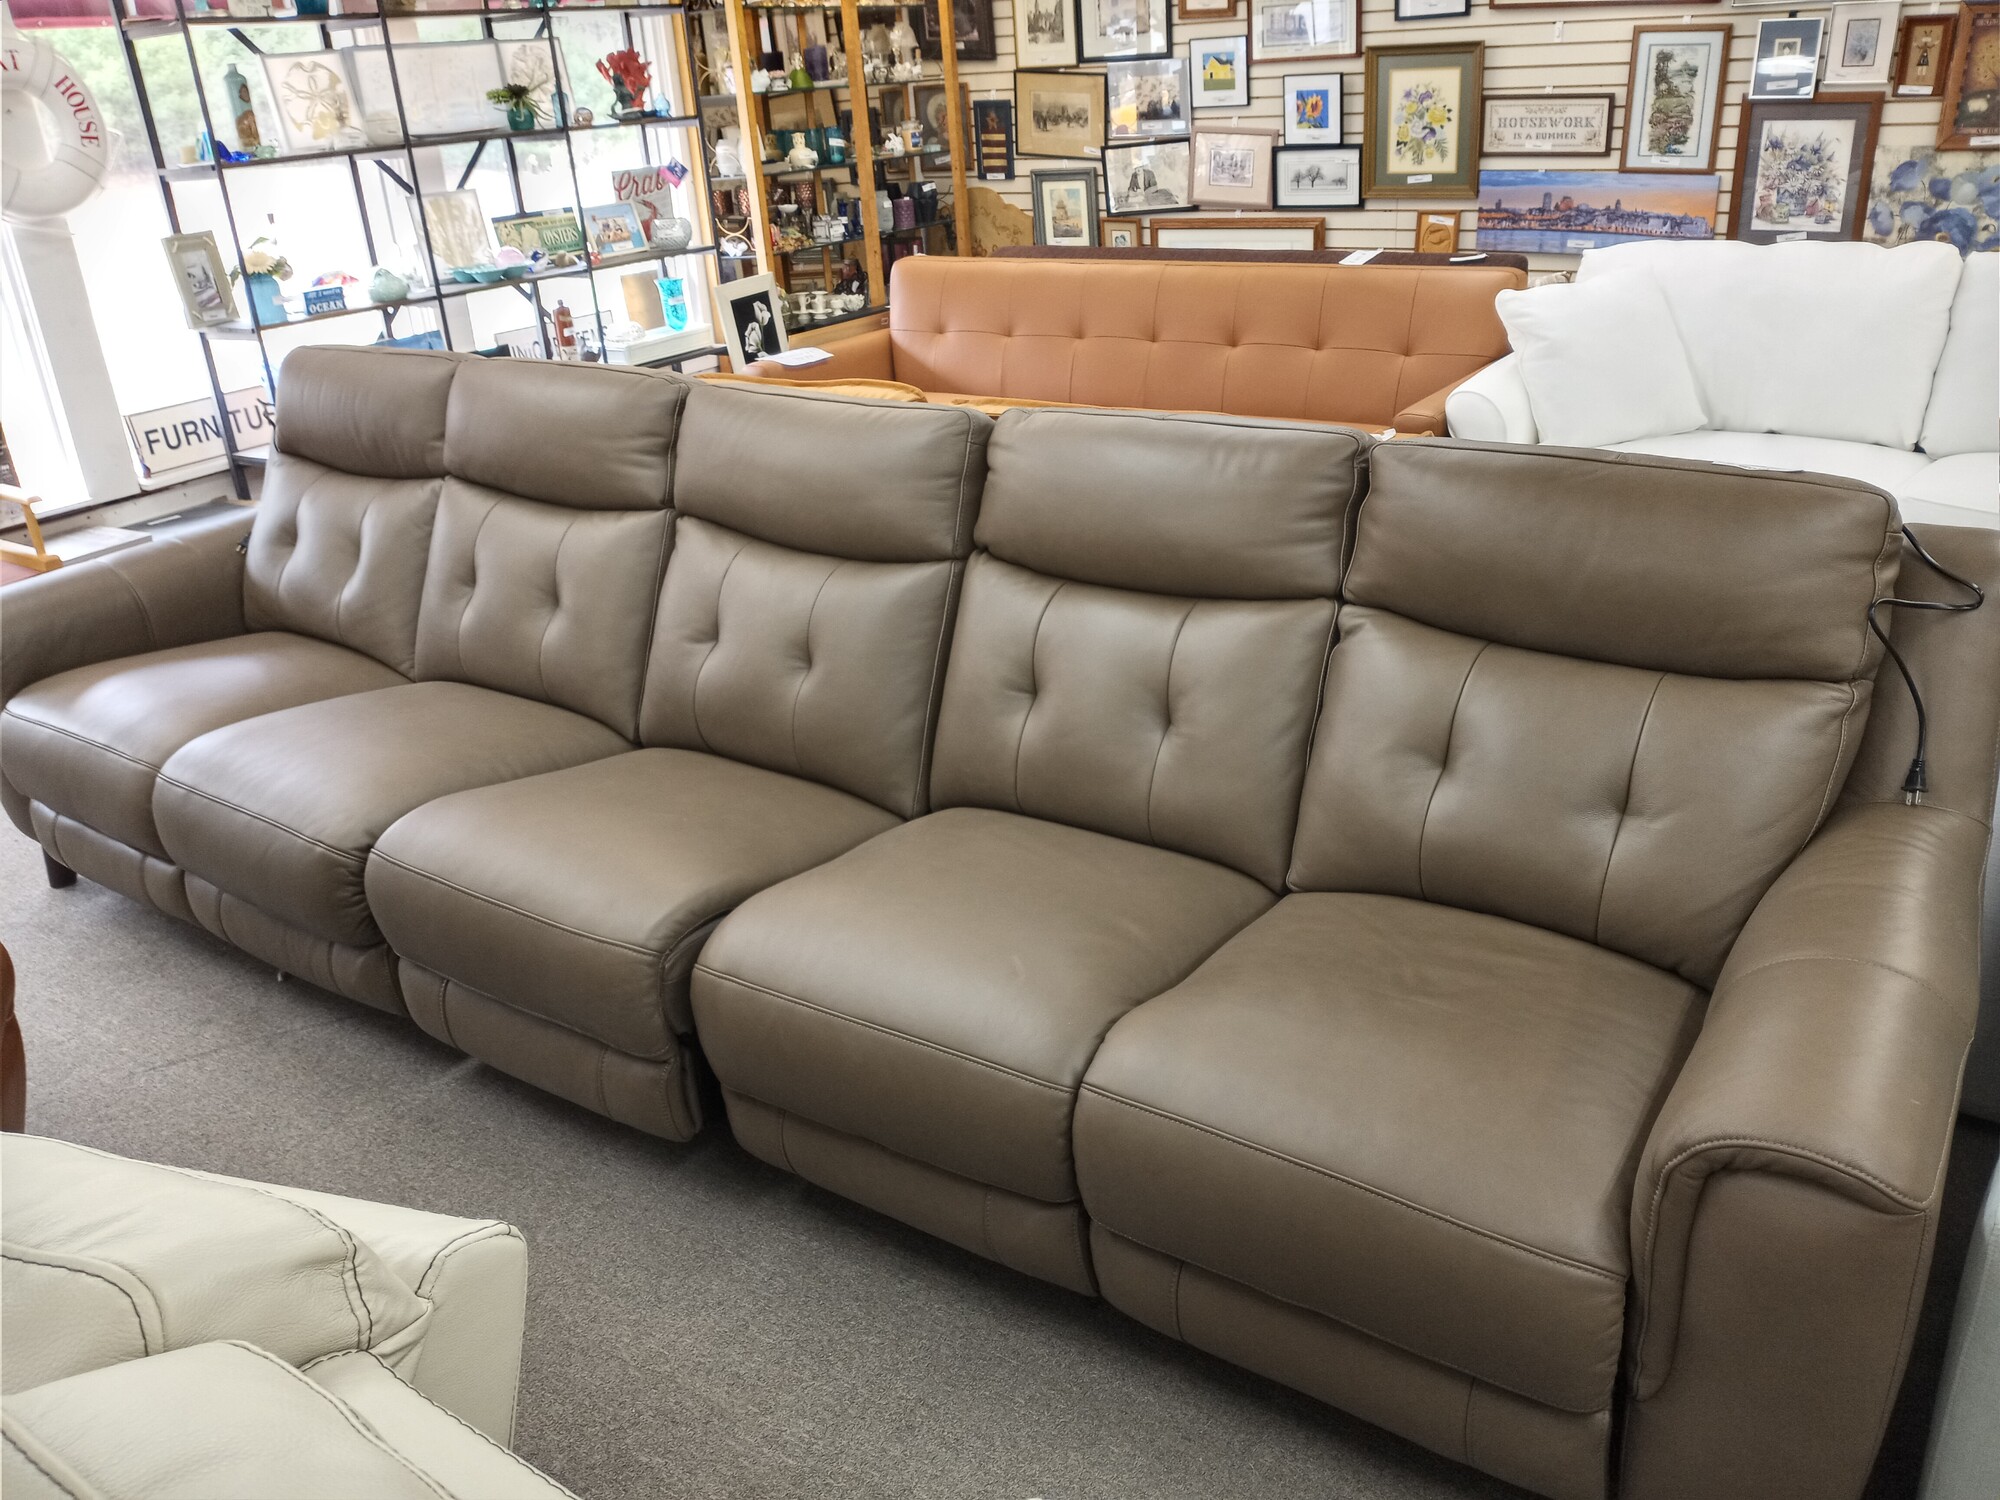 Truffle Brown Sofa dual power recliners real leather!